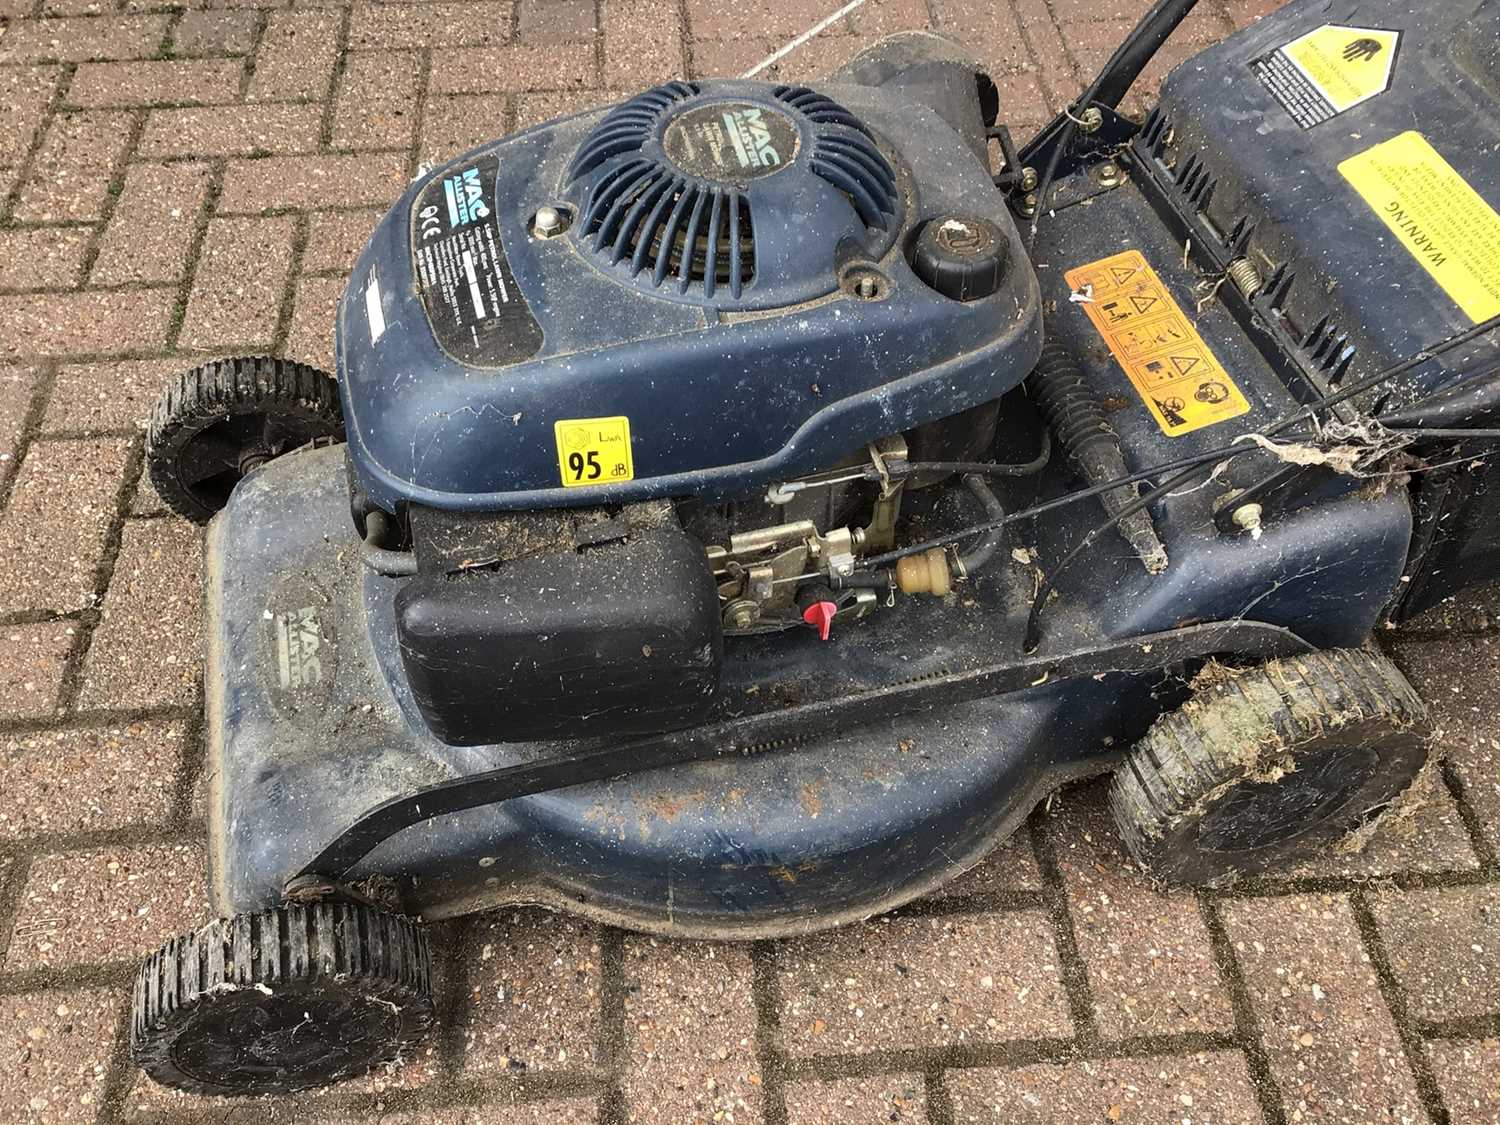 Macallister petrol lawnmower with grass box - Image 4 of 5